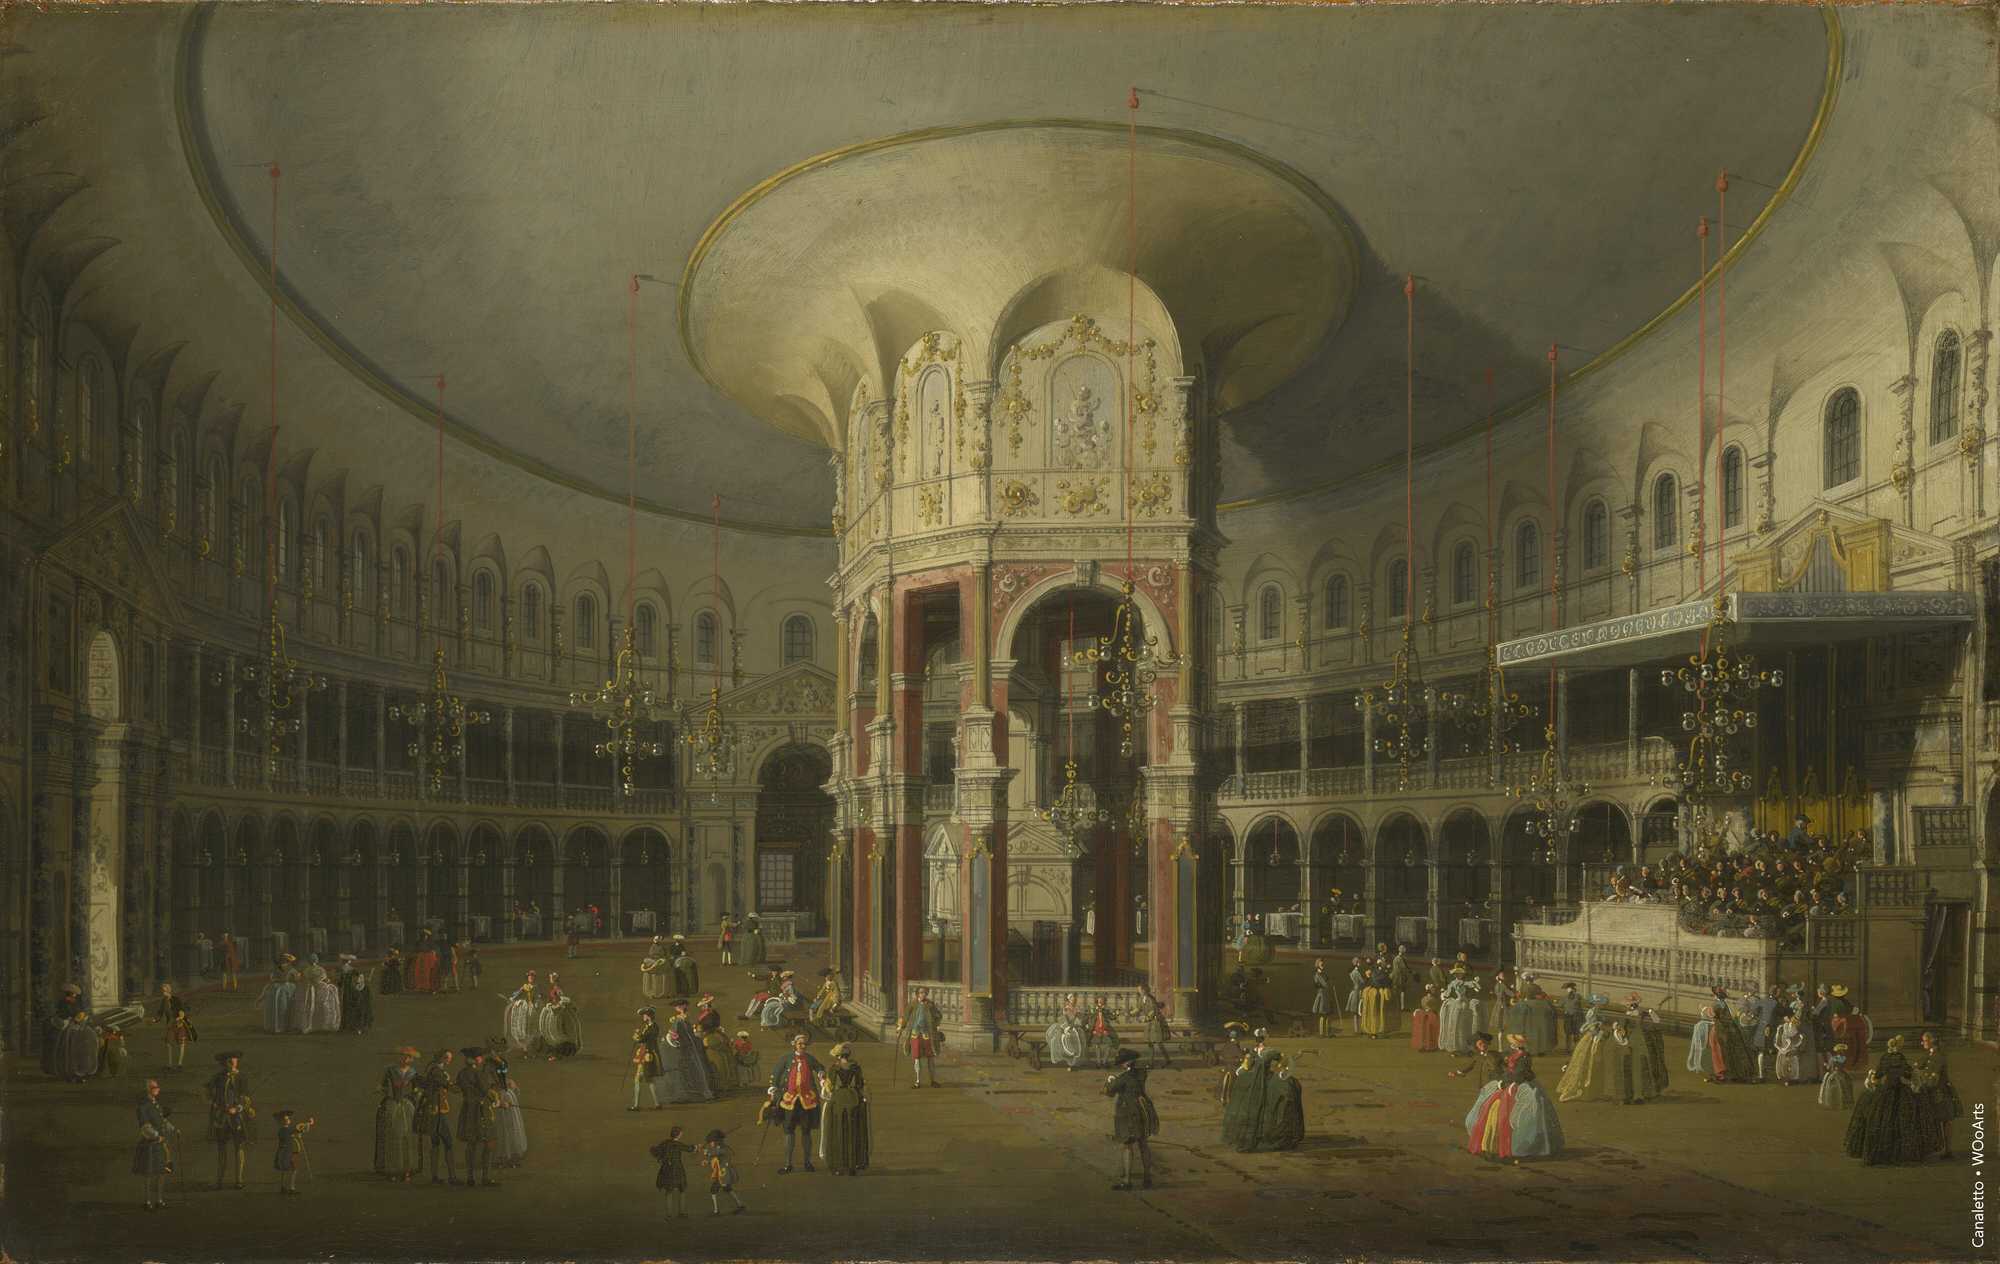 Painting by Canaletto